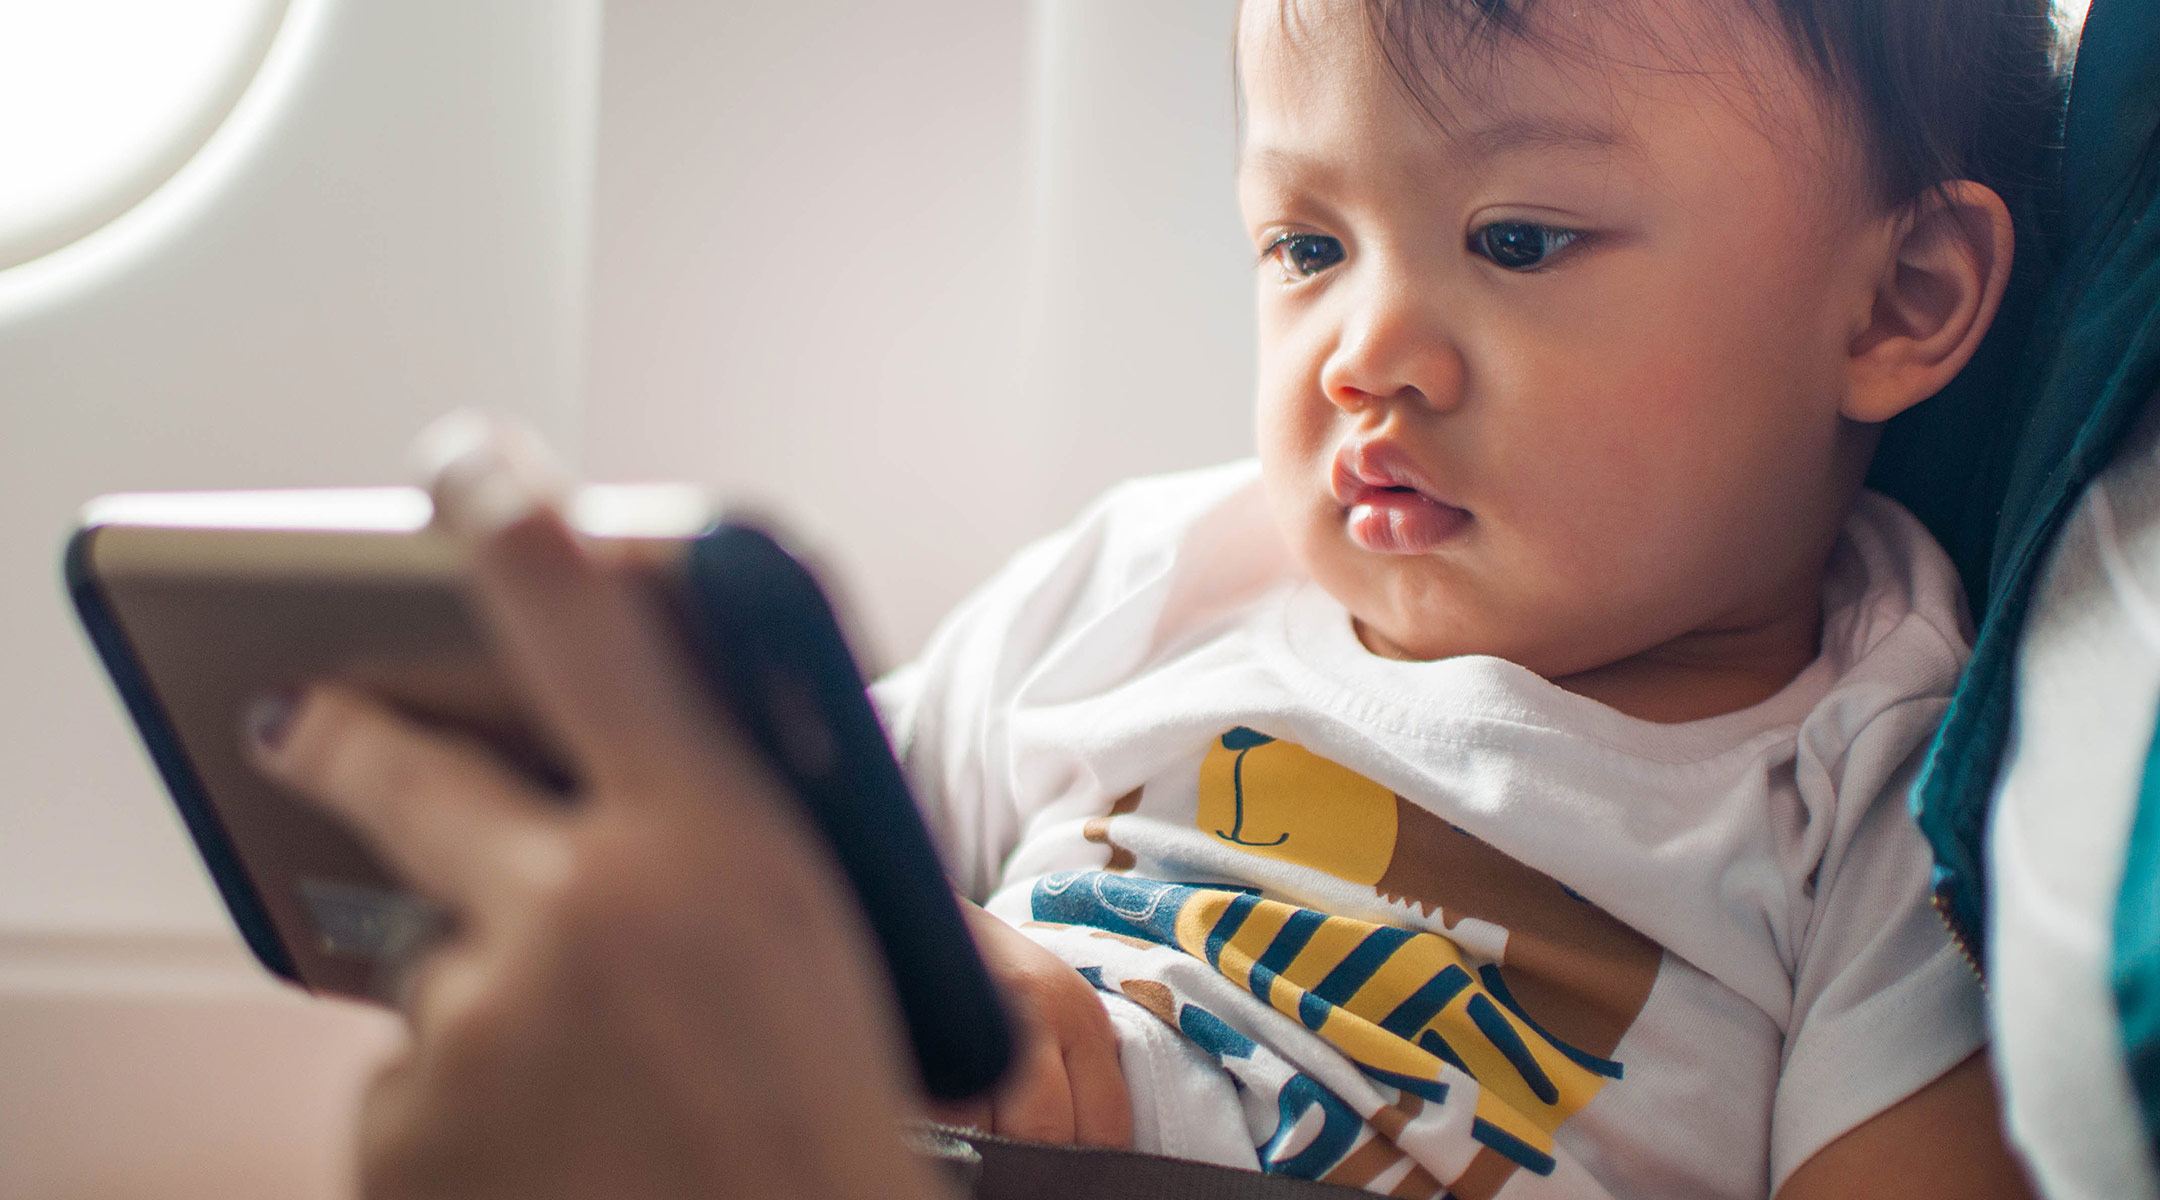 toddler watching screen while on a plane